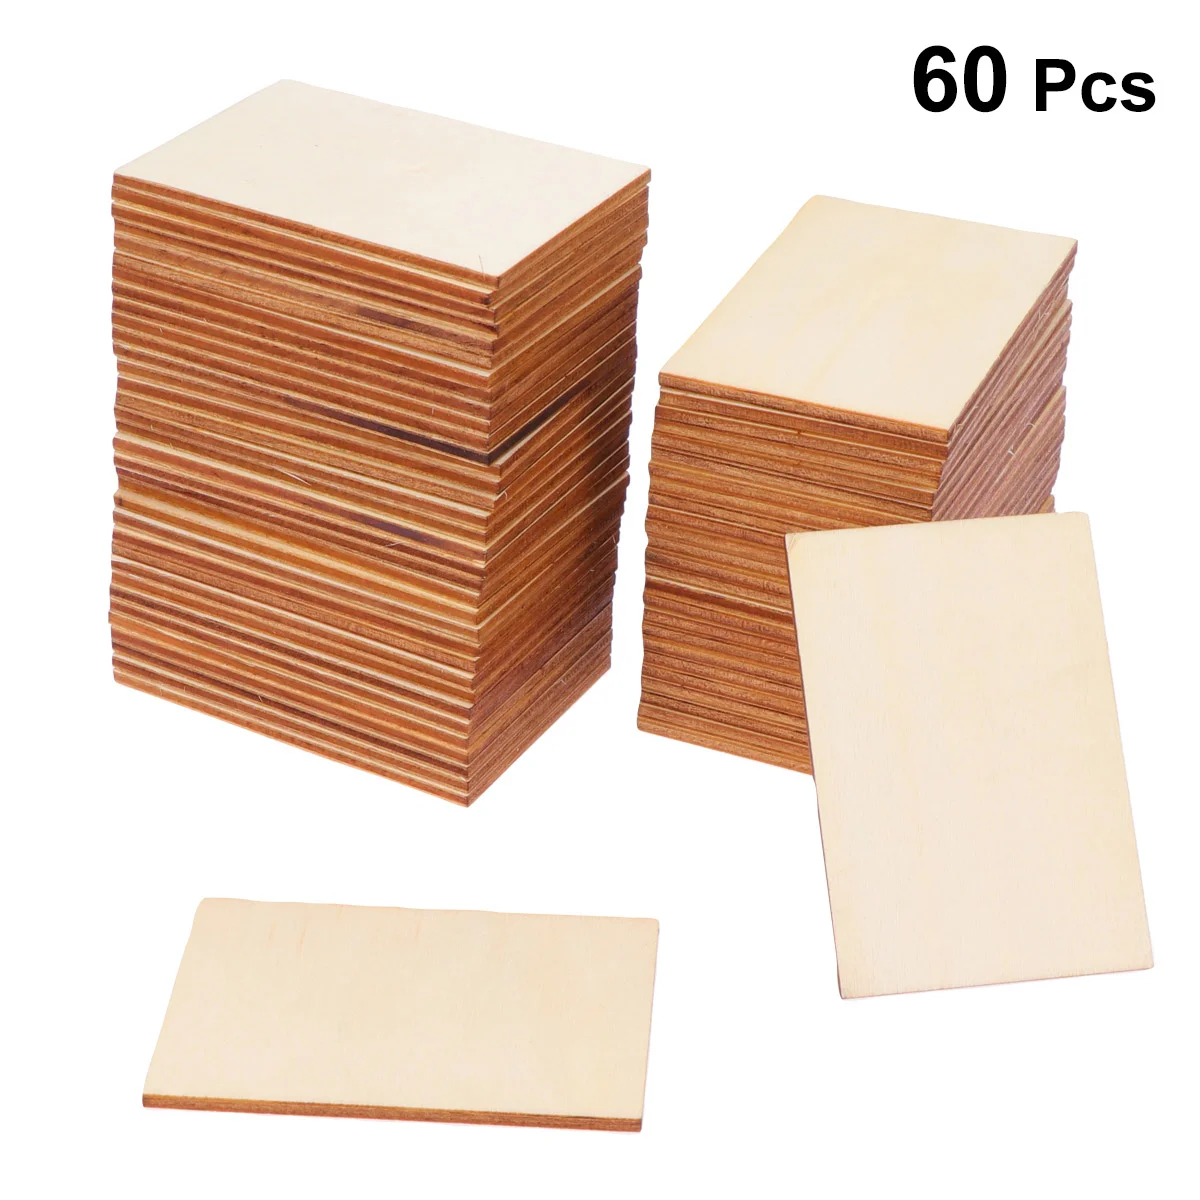 

Wood Wooden Crafts Slices Cutouts Square Unfinished Natural Cutout Log Pieces Shapes Embellishments Discs Craft Tags Blanks